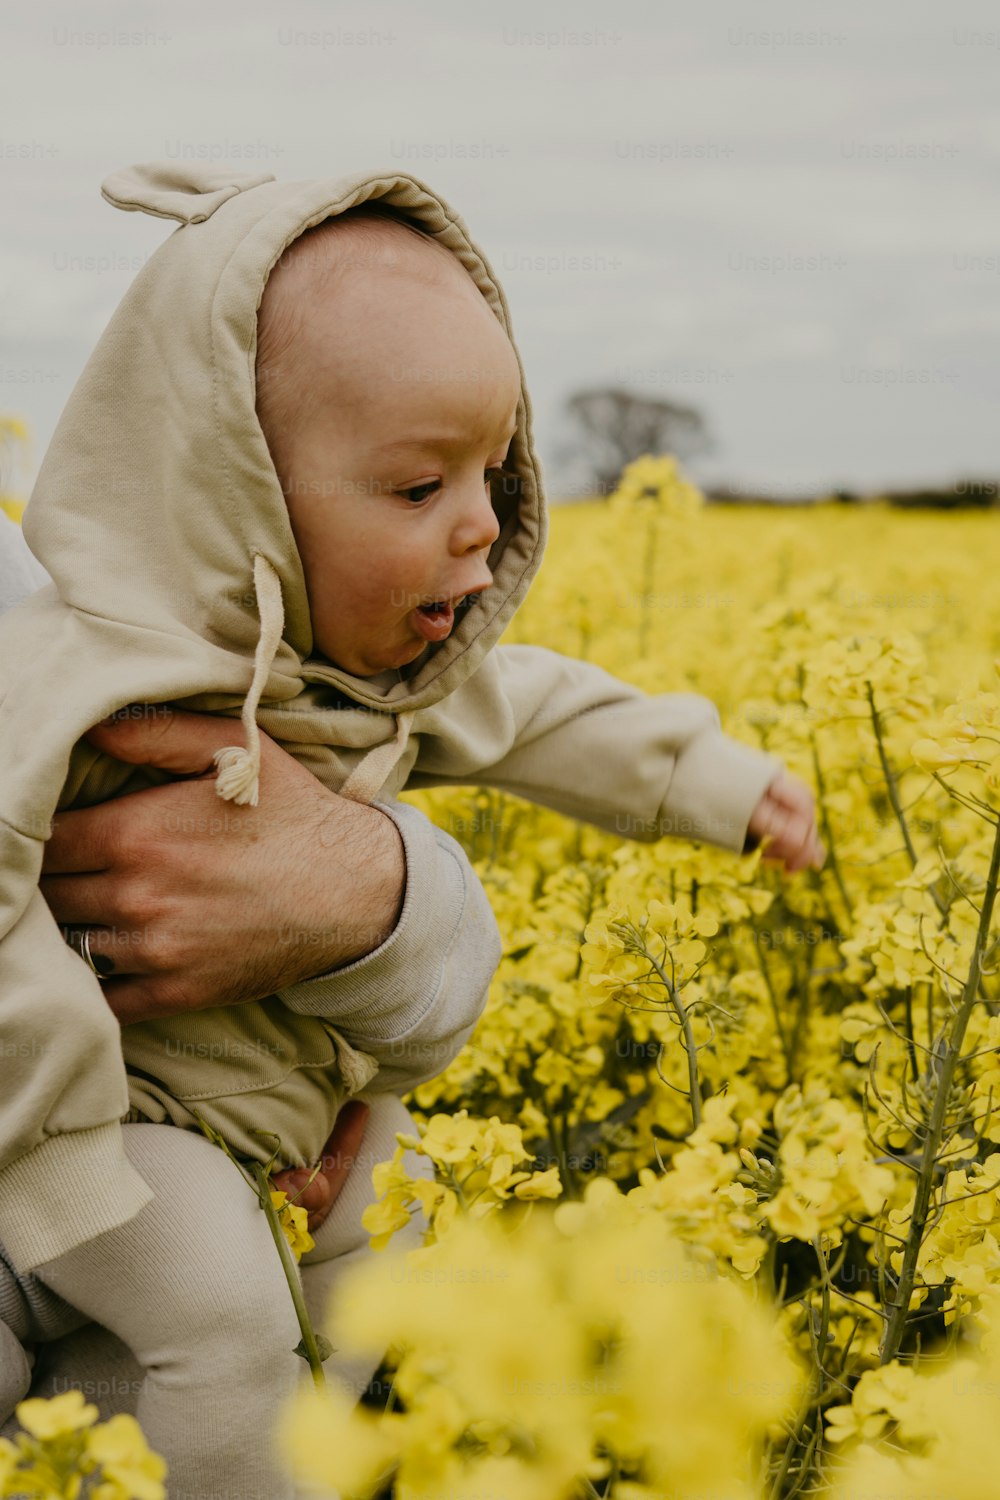 a man holding a baby in a field of yellow flowers